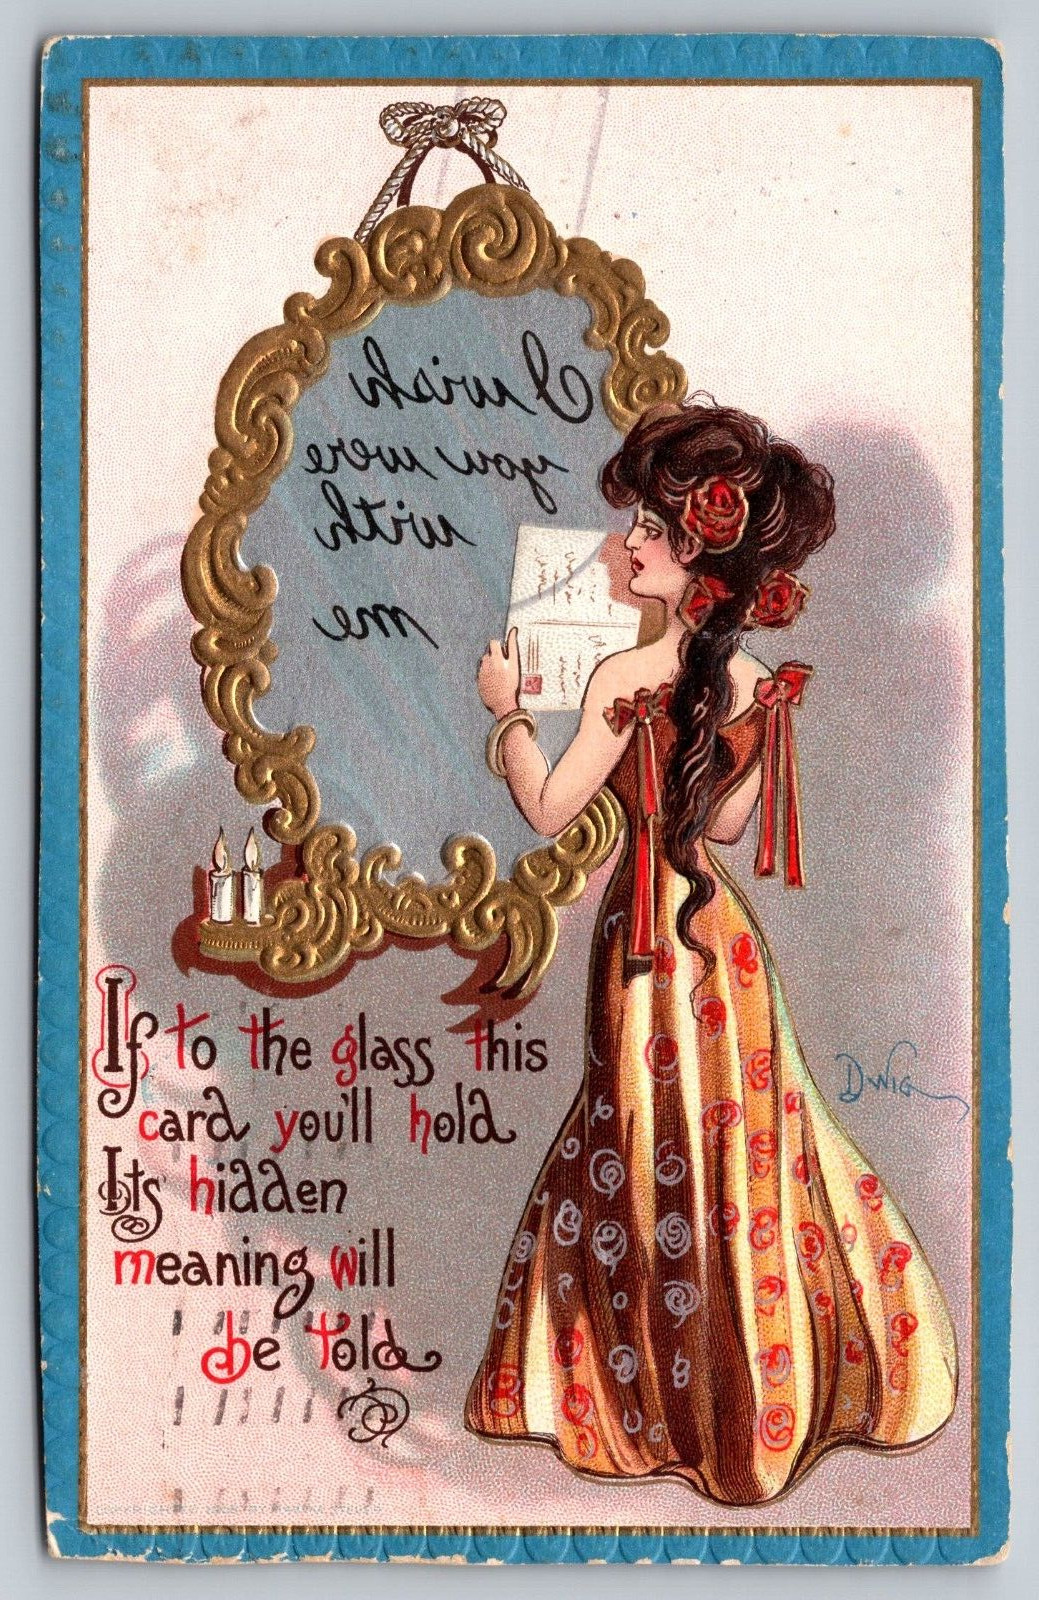 1911 Postcard Looking Glass Mirror Hidden Meaning Greeting